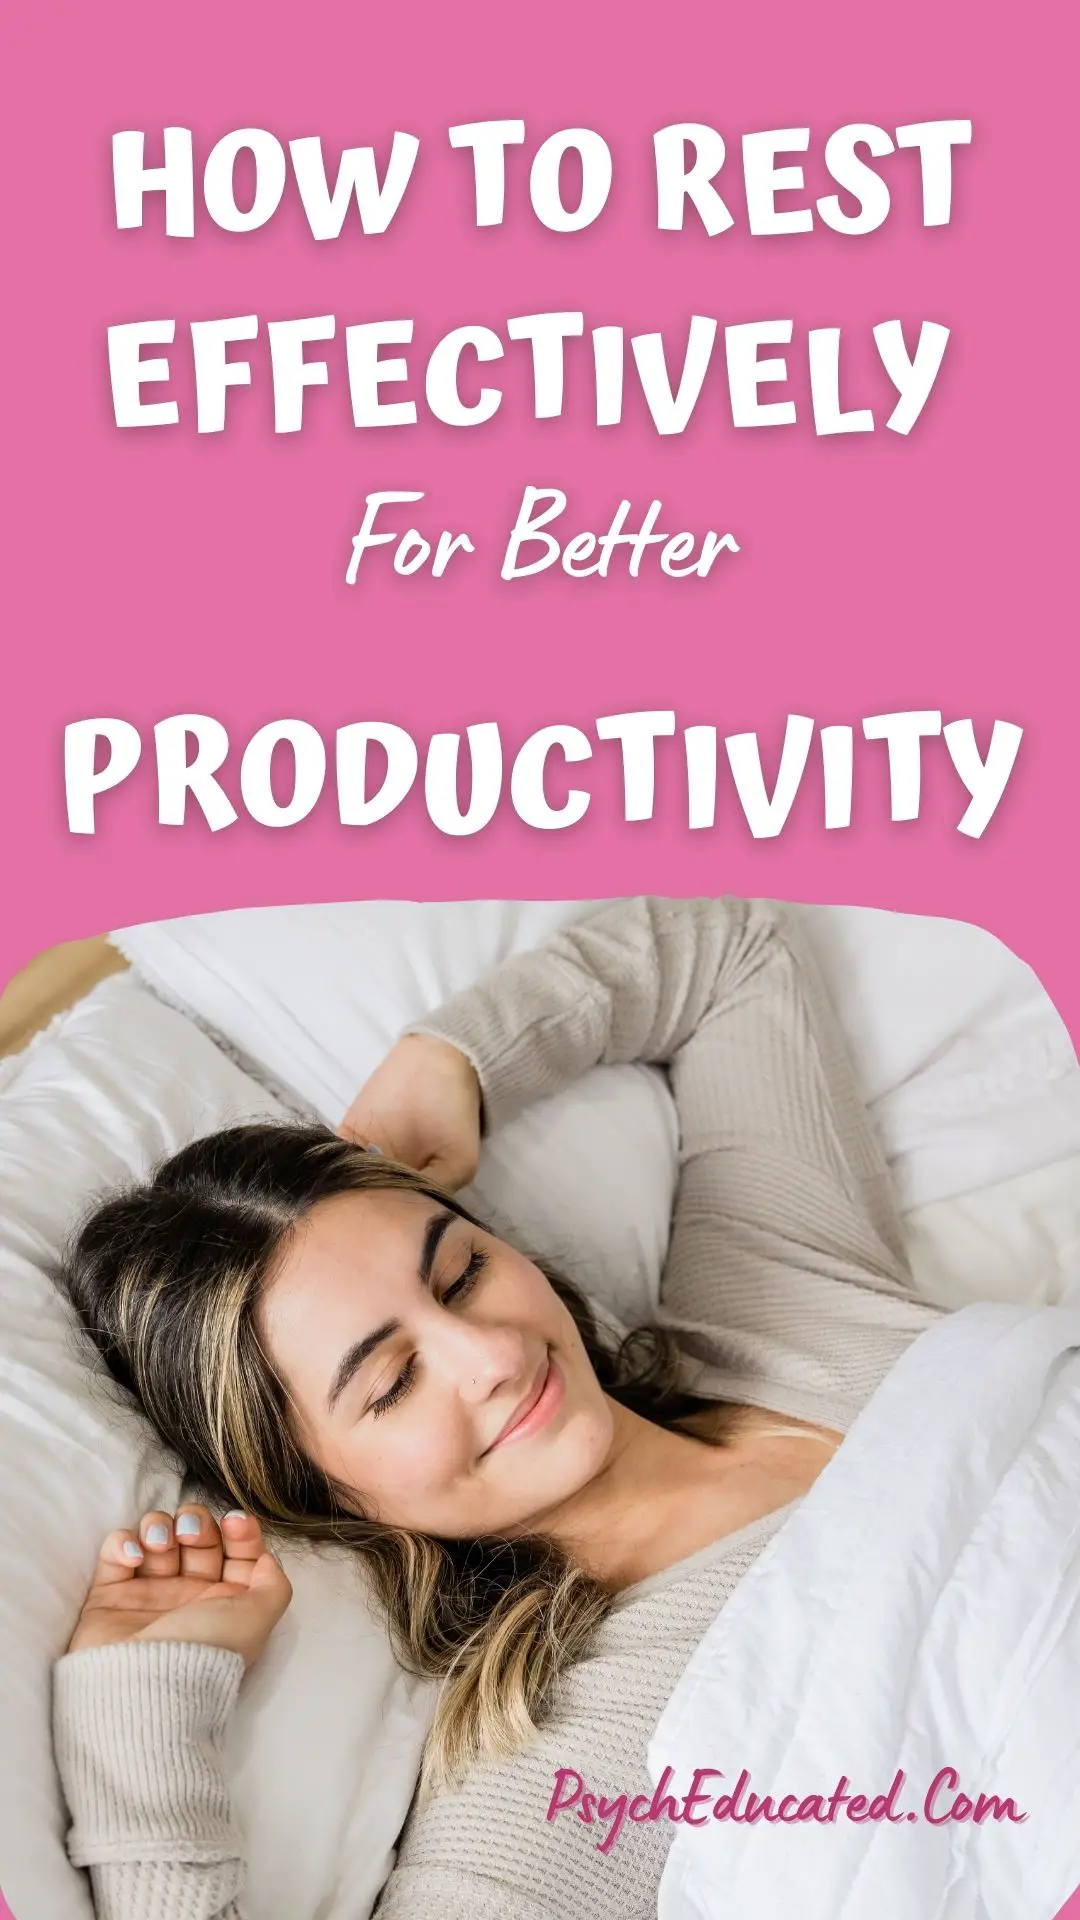 How To Rest Effectively For Better Productivity